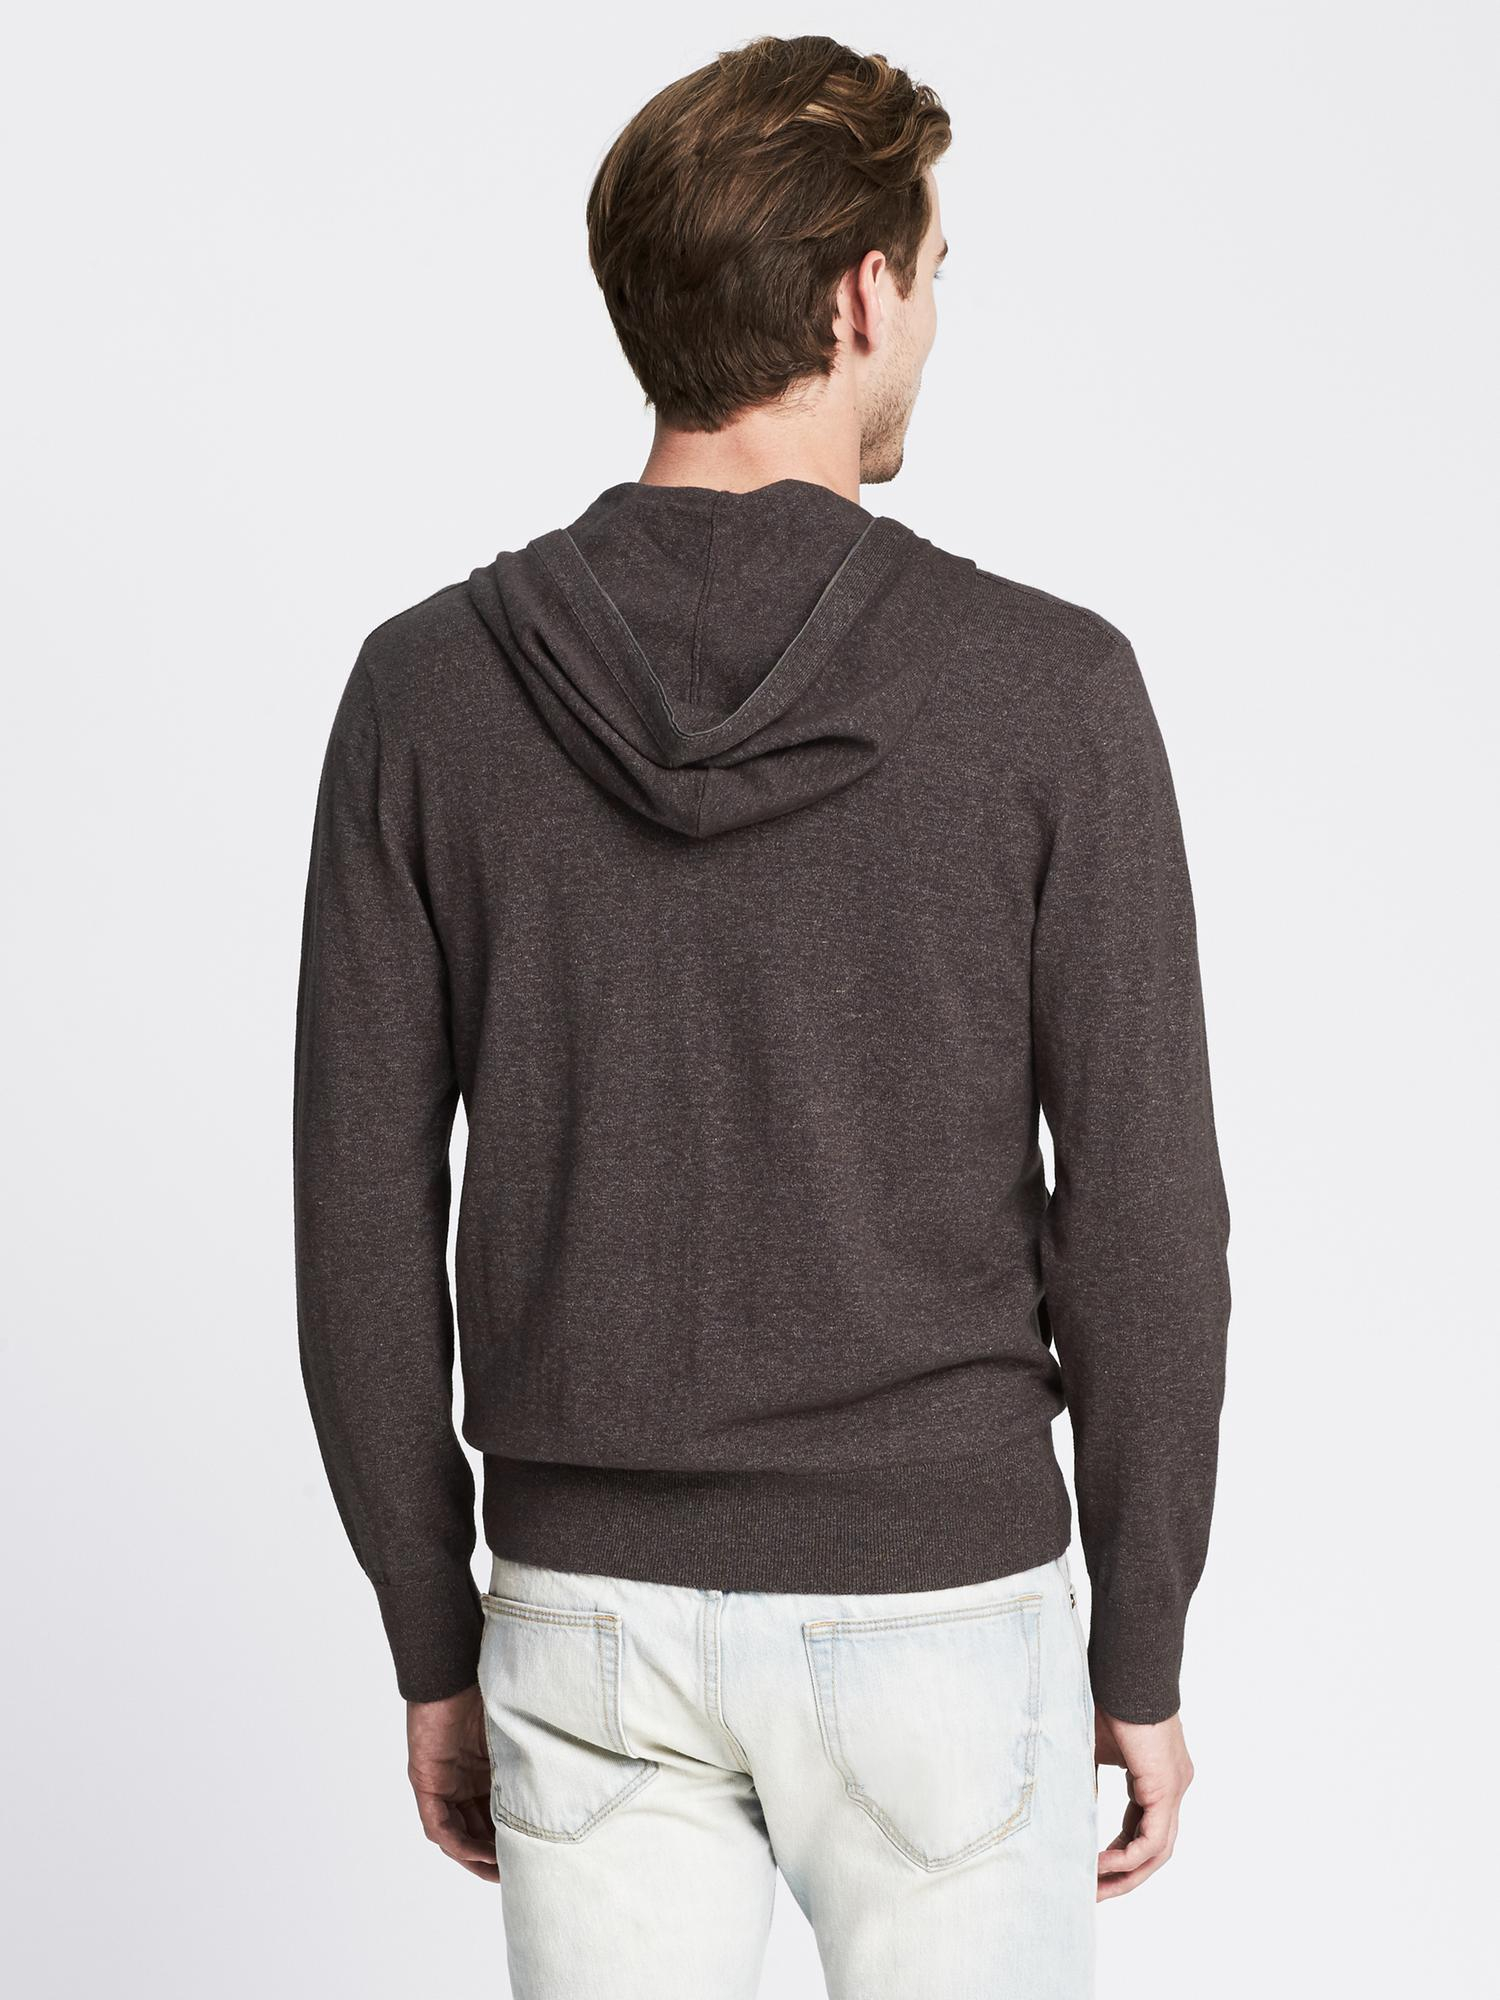 Lyst - Banana Republic Piped Hooded Zip Cardigan in Brown for Men